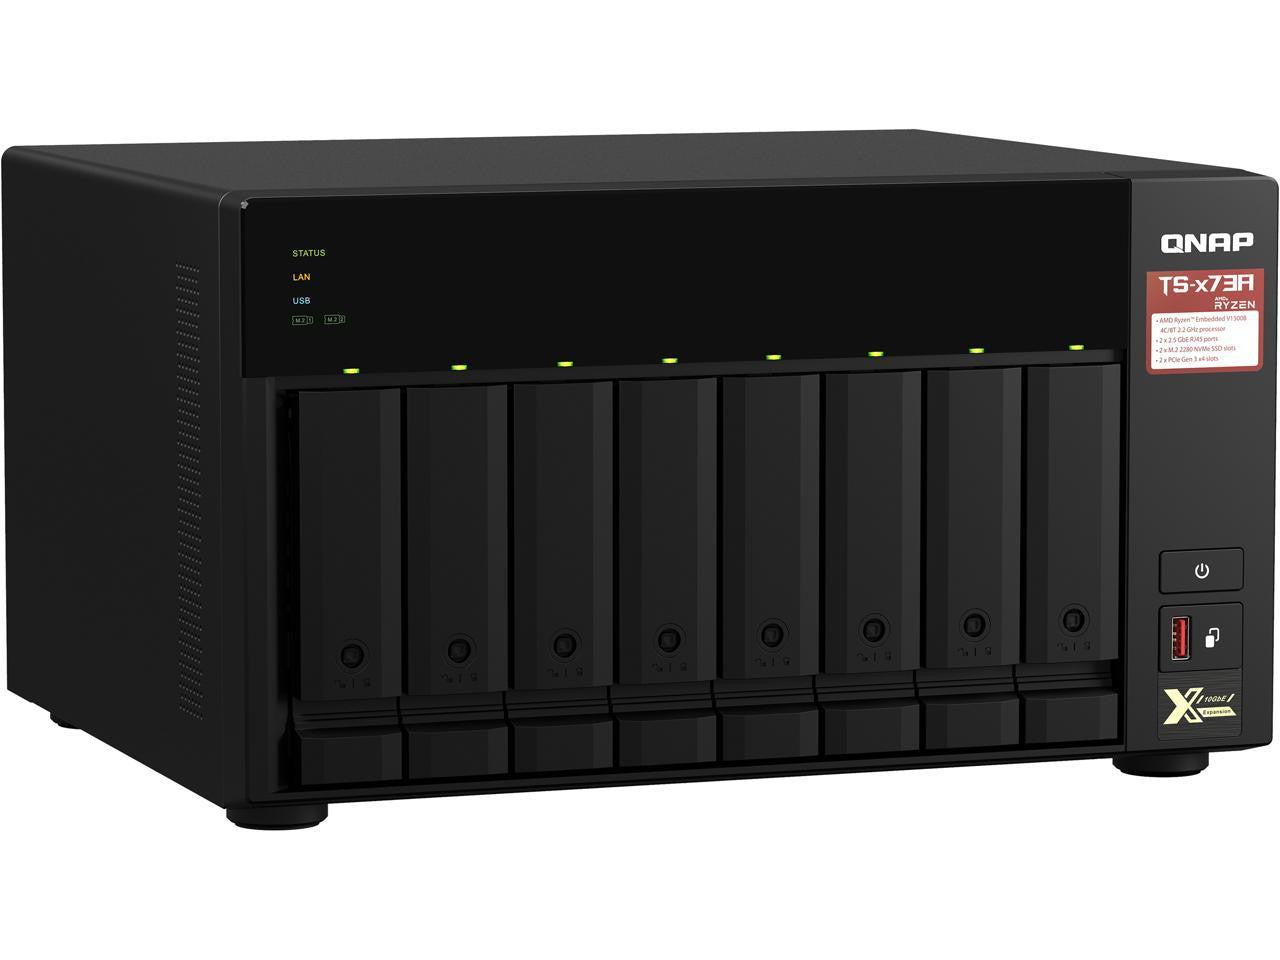 QNAP TS-873A 8-BAY NAS with 16GB DDR4 RAM and 48TB (8x6TB) Seagate Ironwolf NAS Drives Fully Assembled and Tested